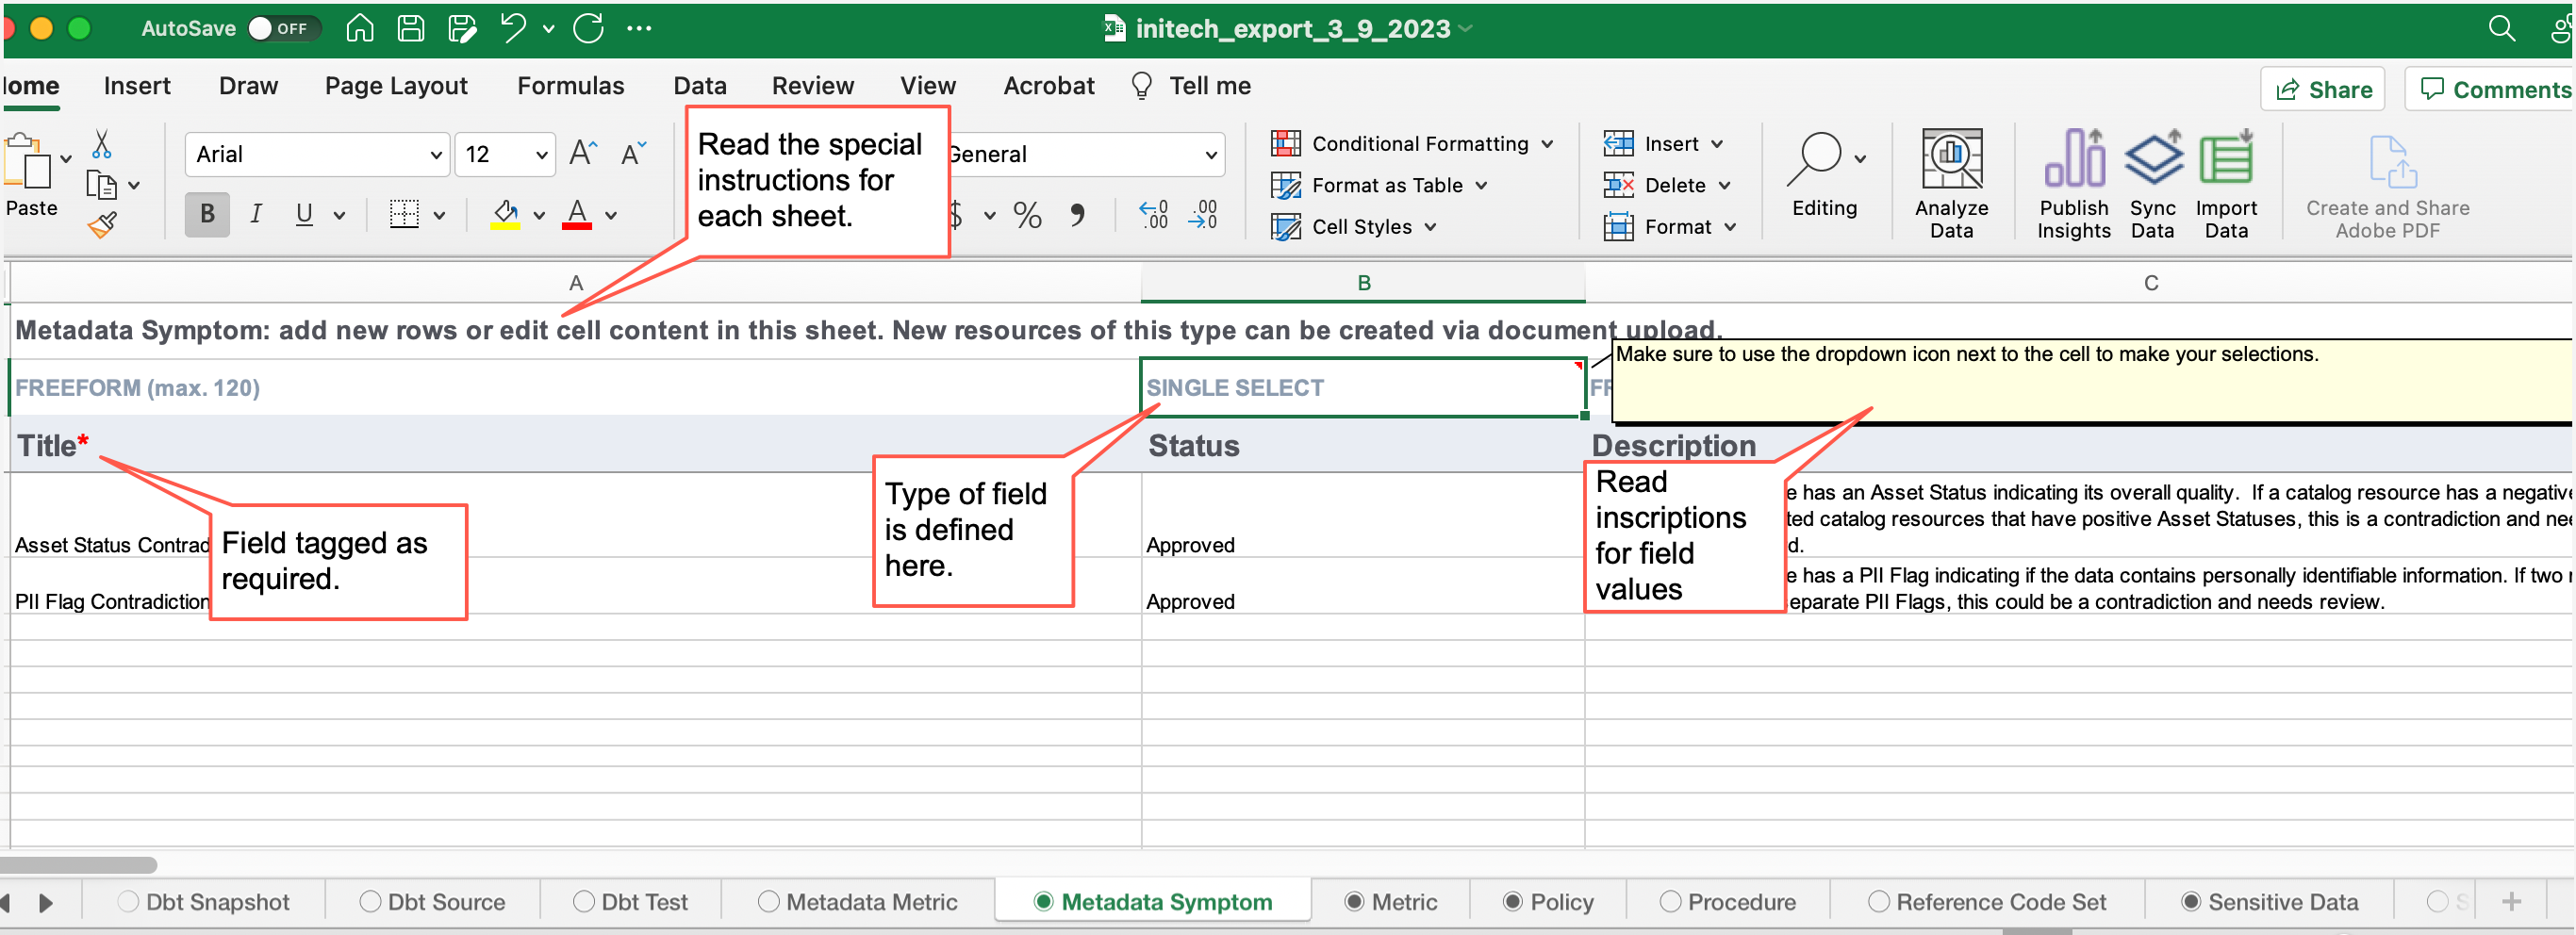 sample_excel_bulk_import_glossary.png